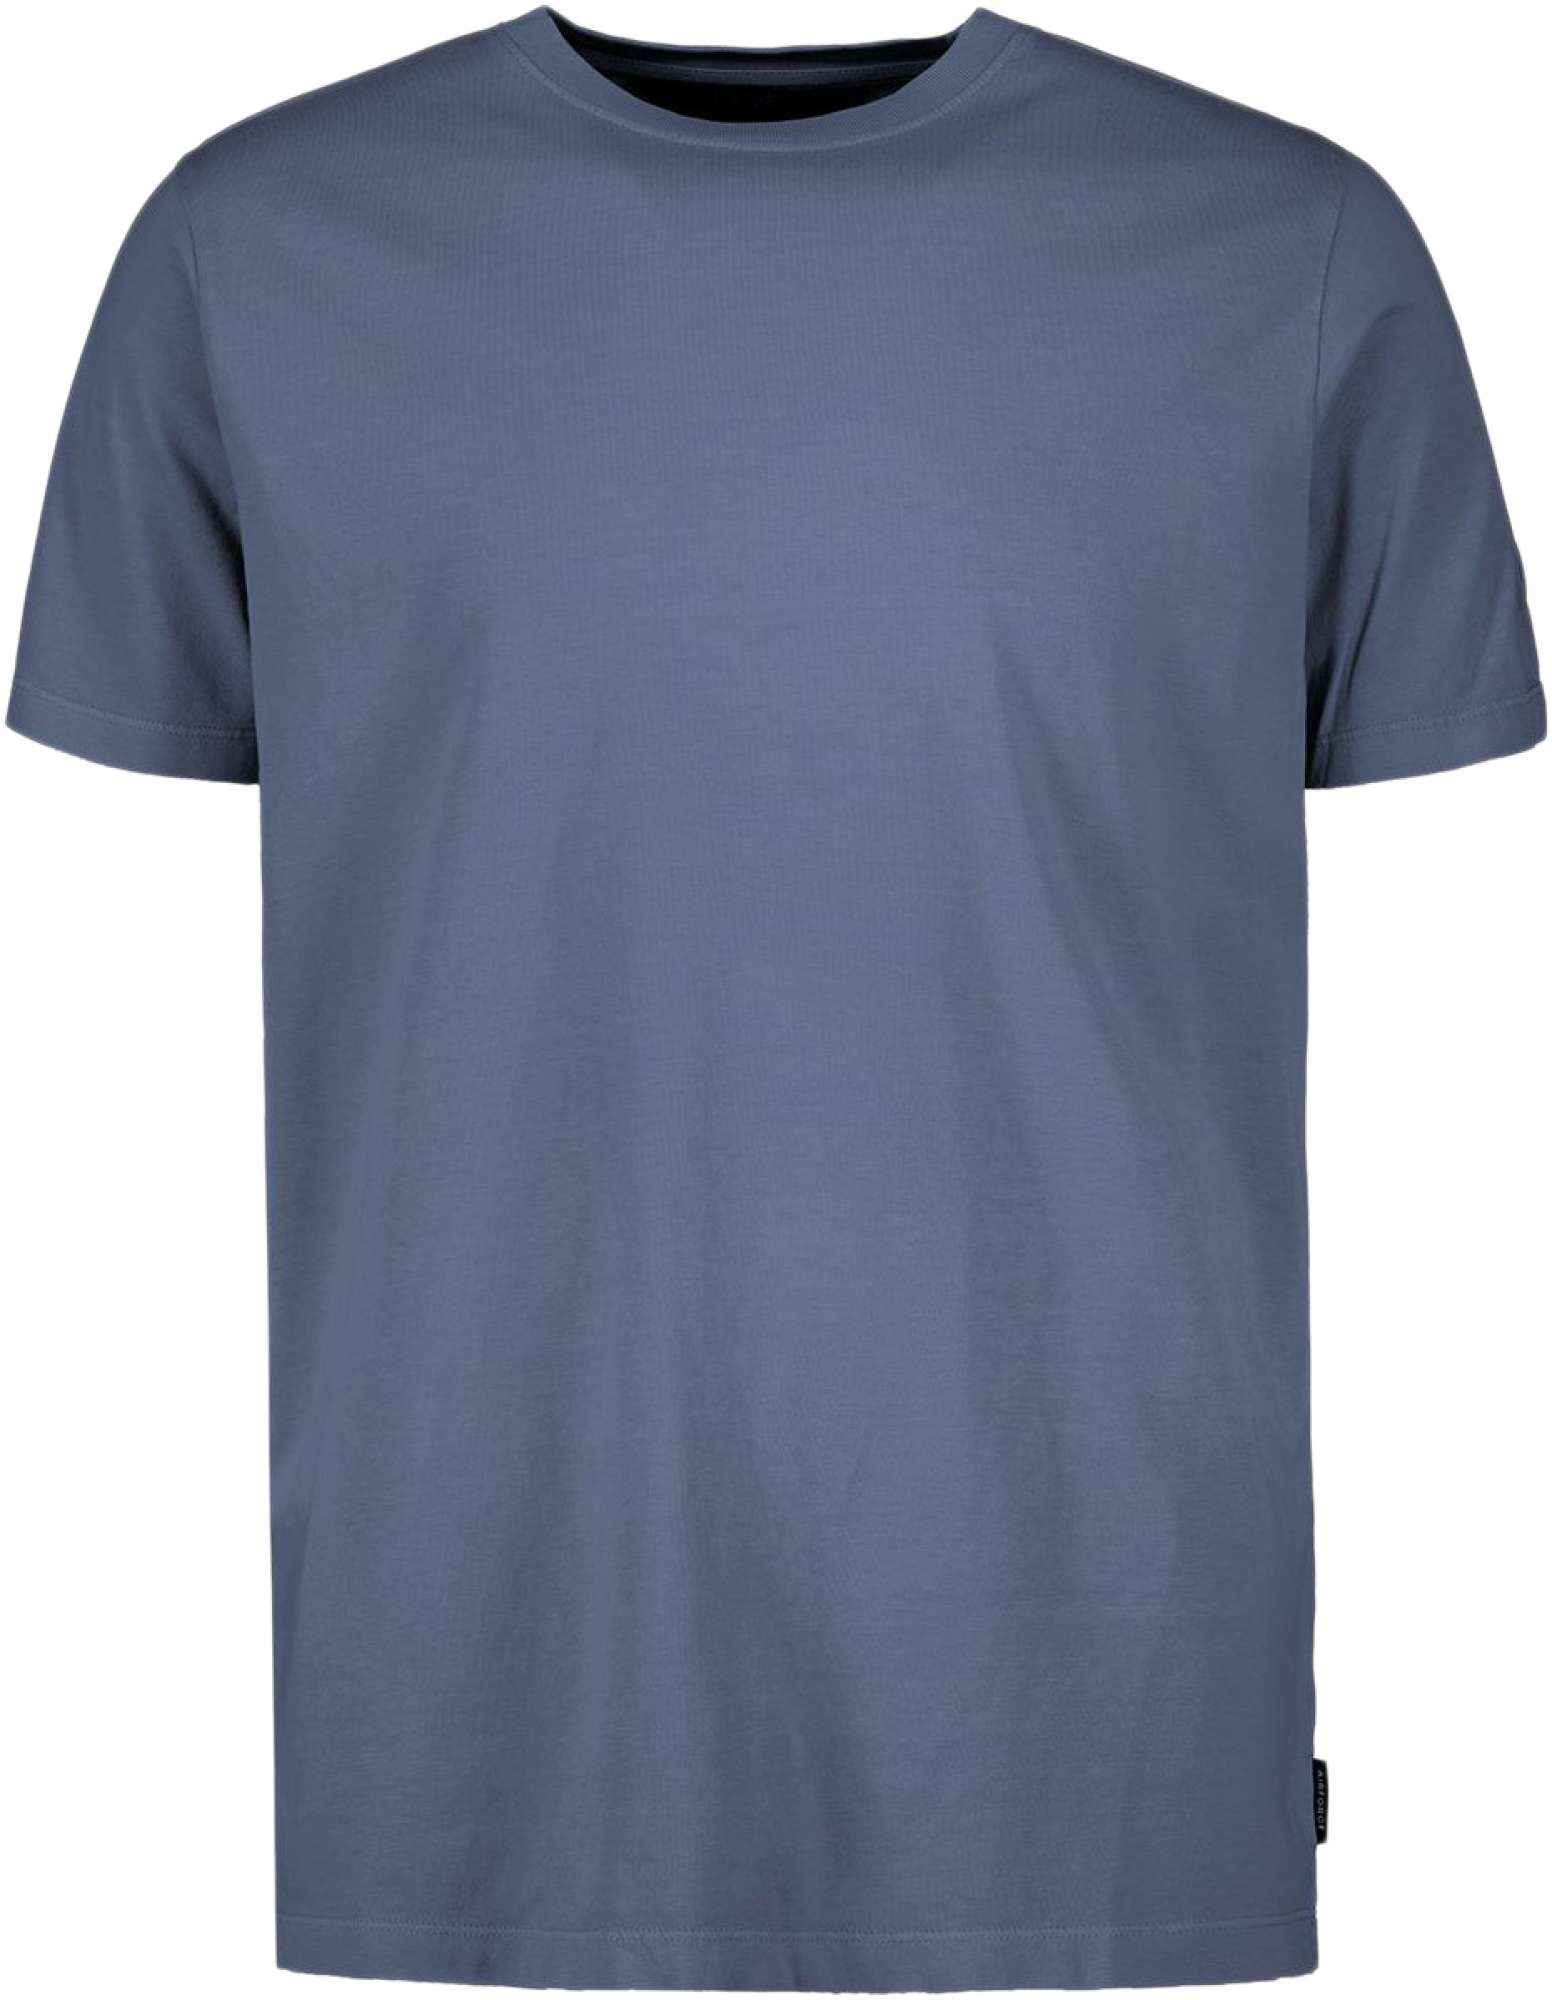 Afbeelding van Airforce T-shirts garment dyed ombre blue